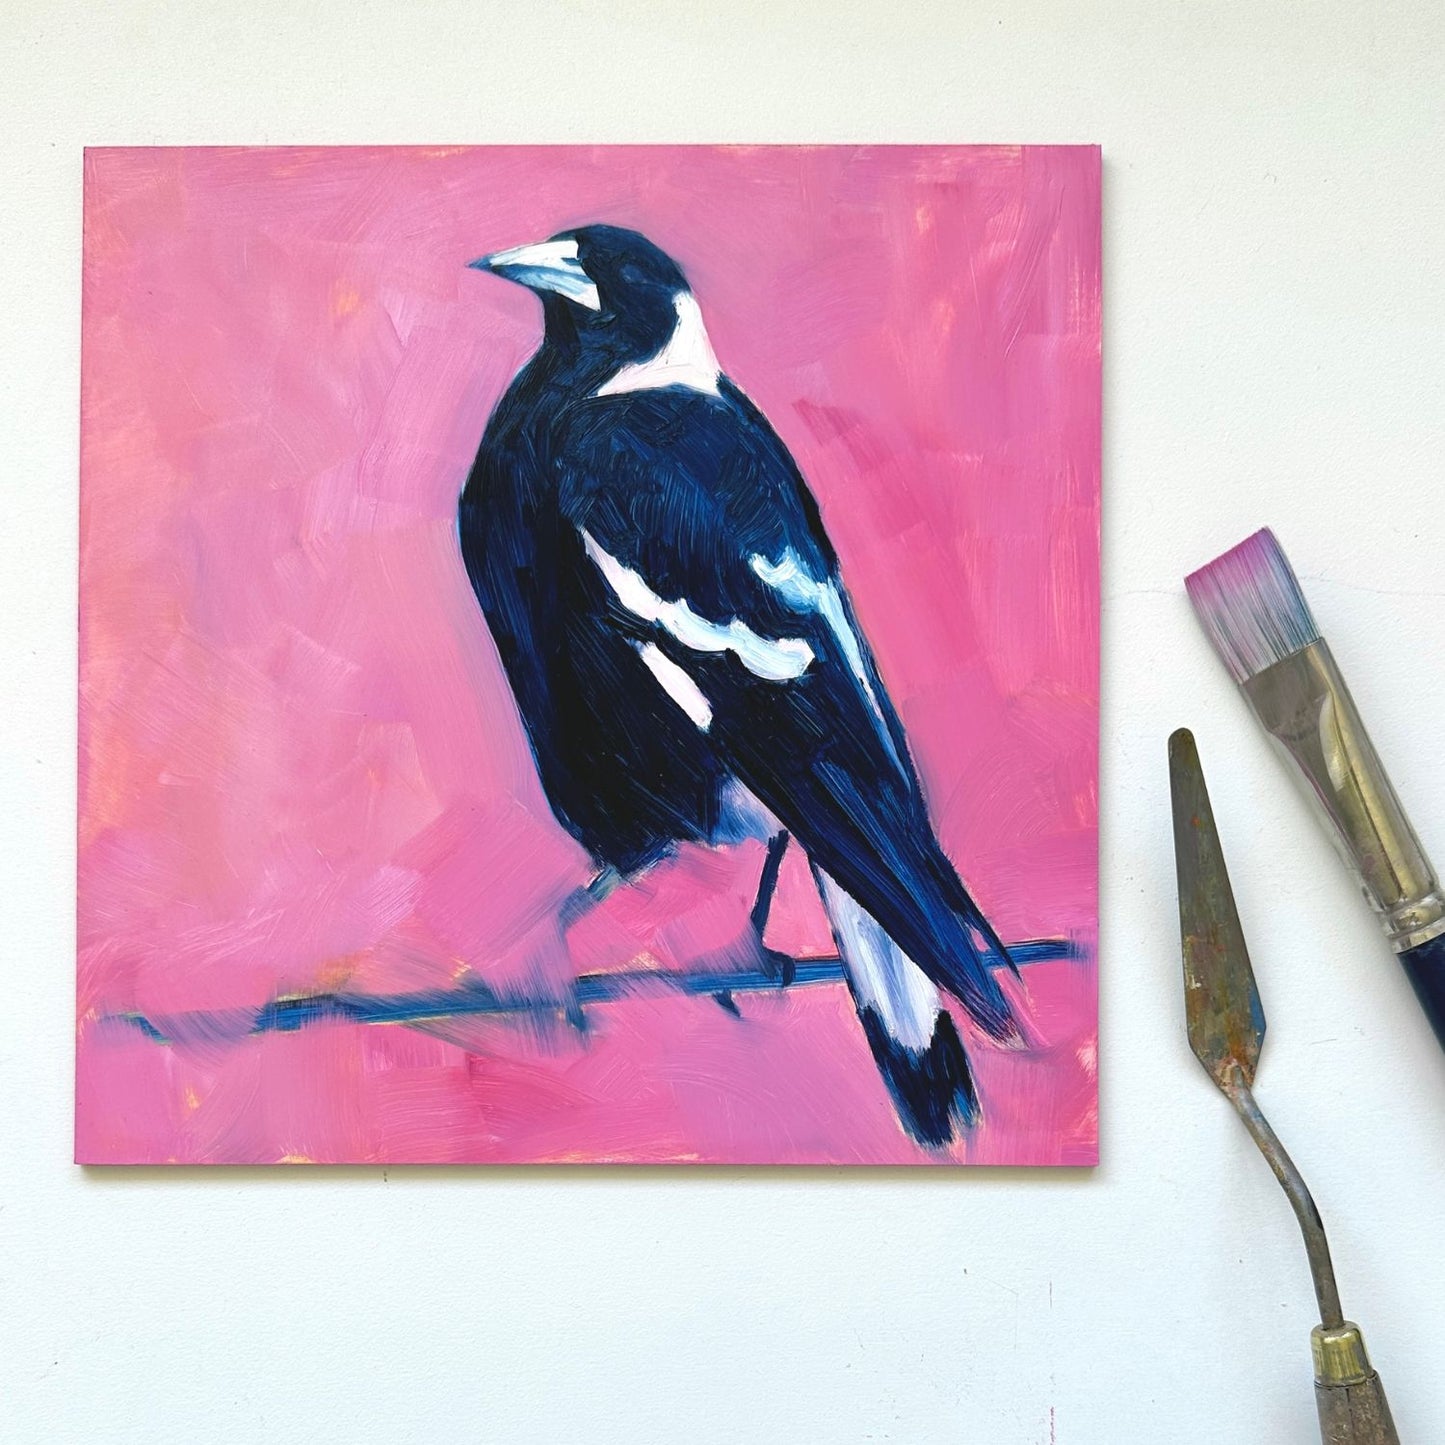 lifestyle photo of an original oil painting of a navy blue and white magpie on a textured bright pink background. the painting is on a white desk and there is a paintbrush and palette knife next to it